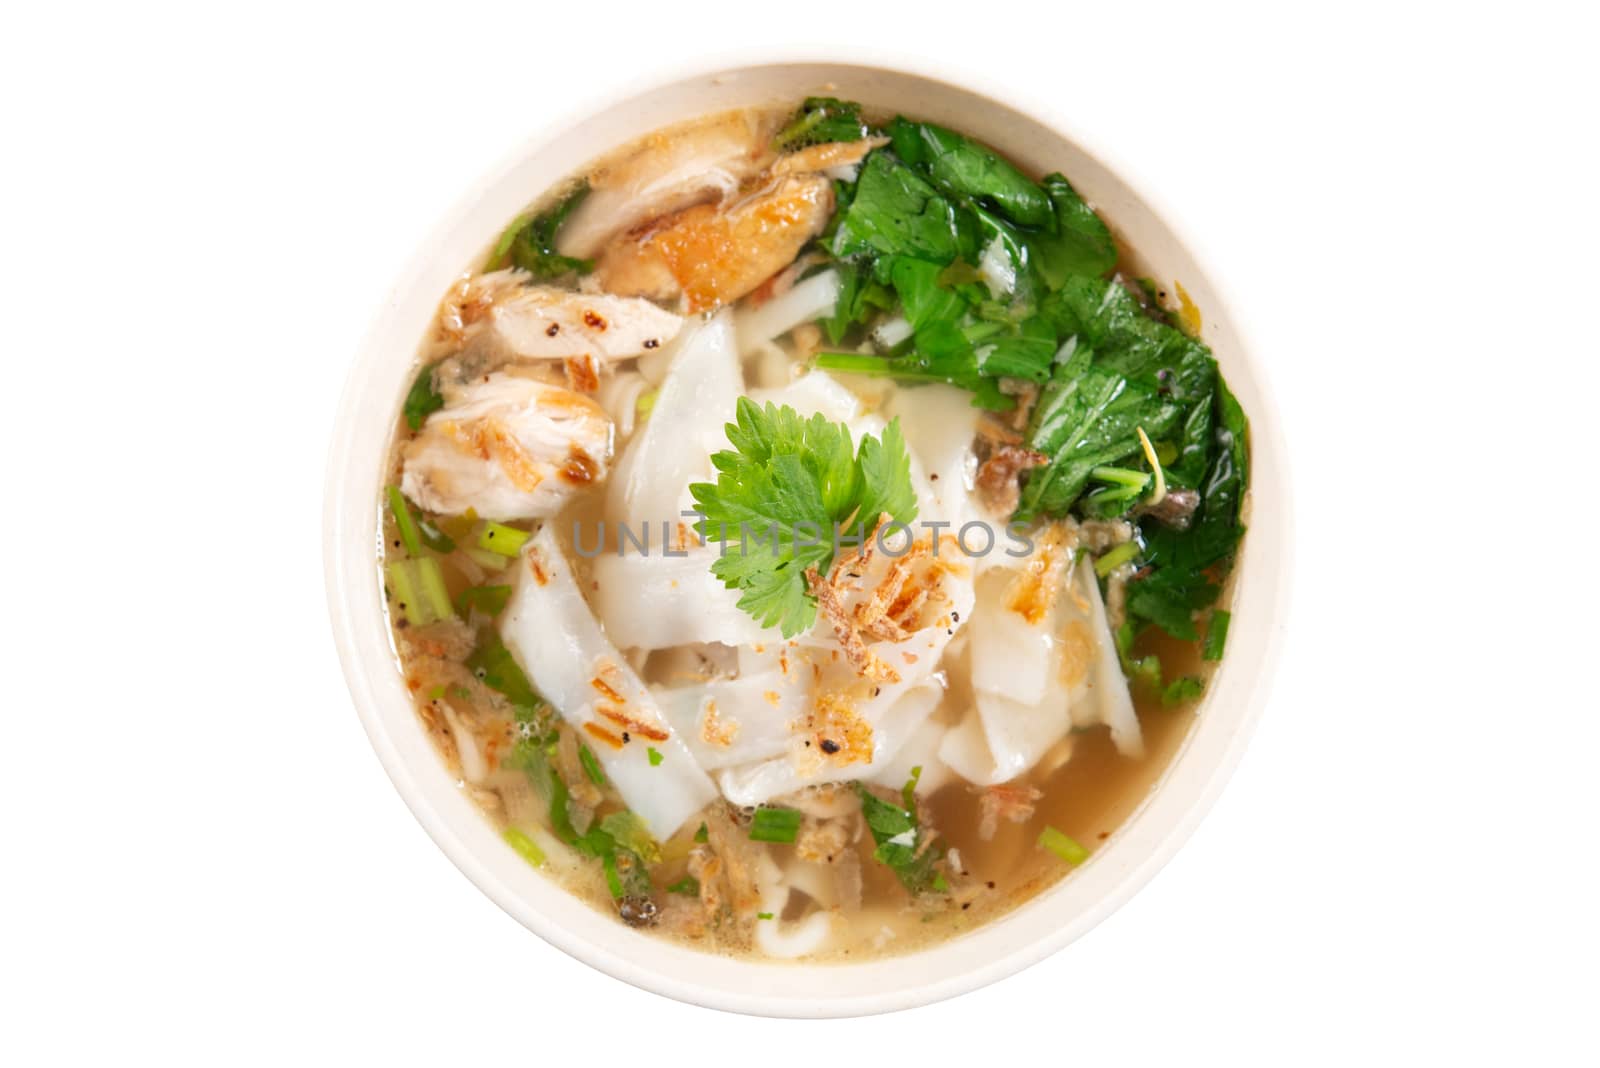 Asian kway teow soup noodles and chicken in bowl. Top view flat lay isolated on white background.